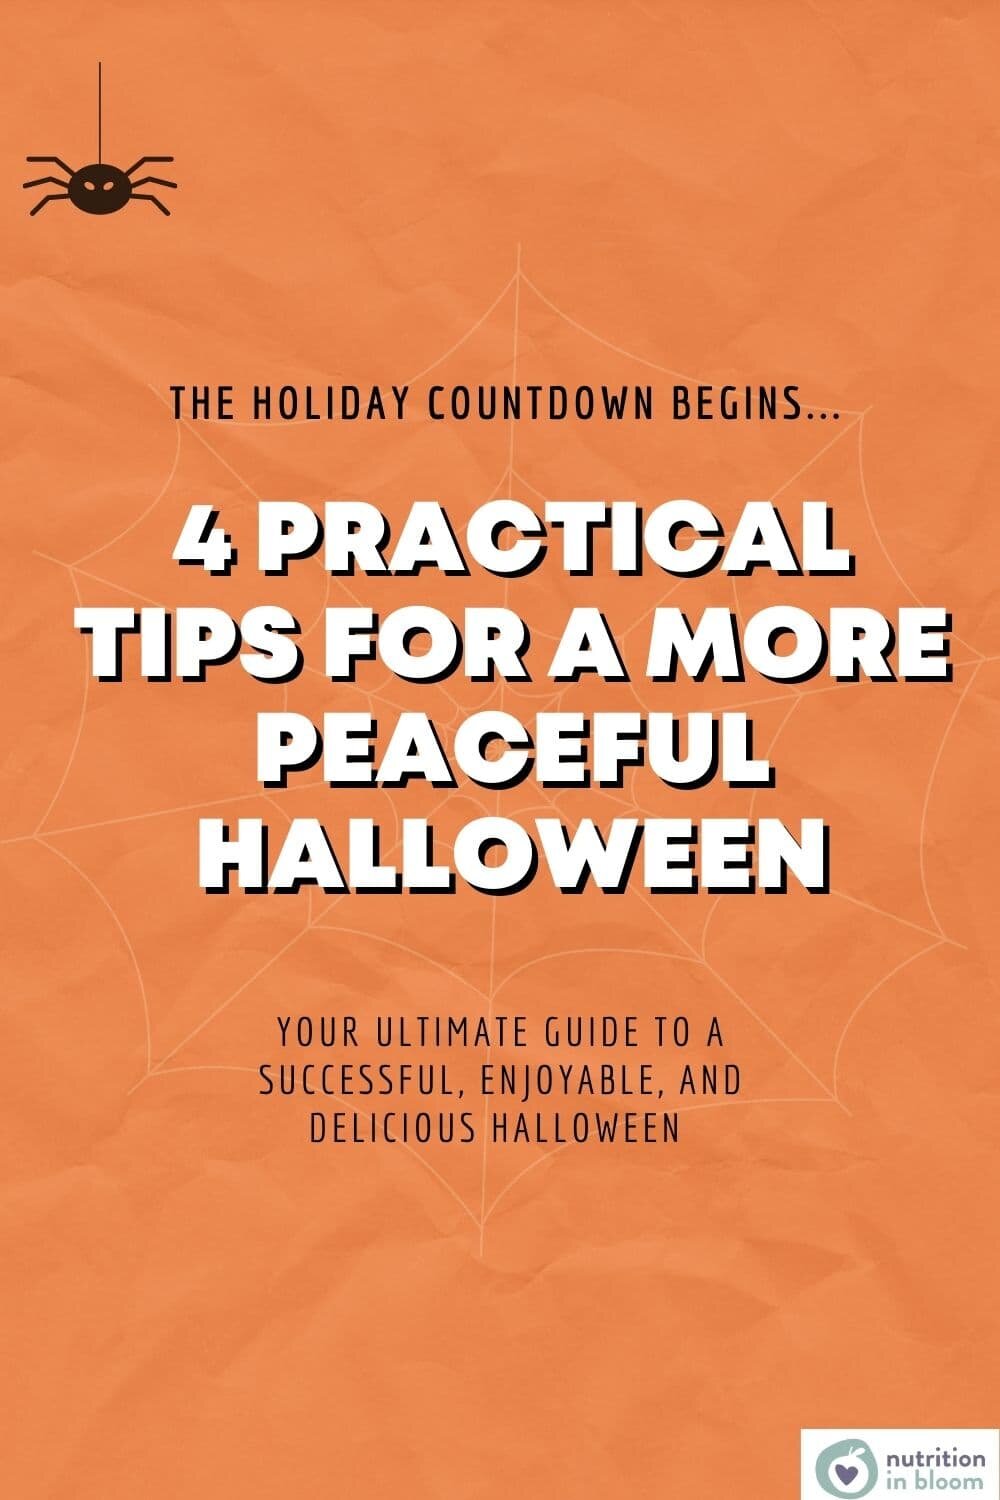 4 practical tips for a more peaceful Halloween